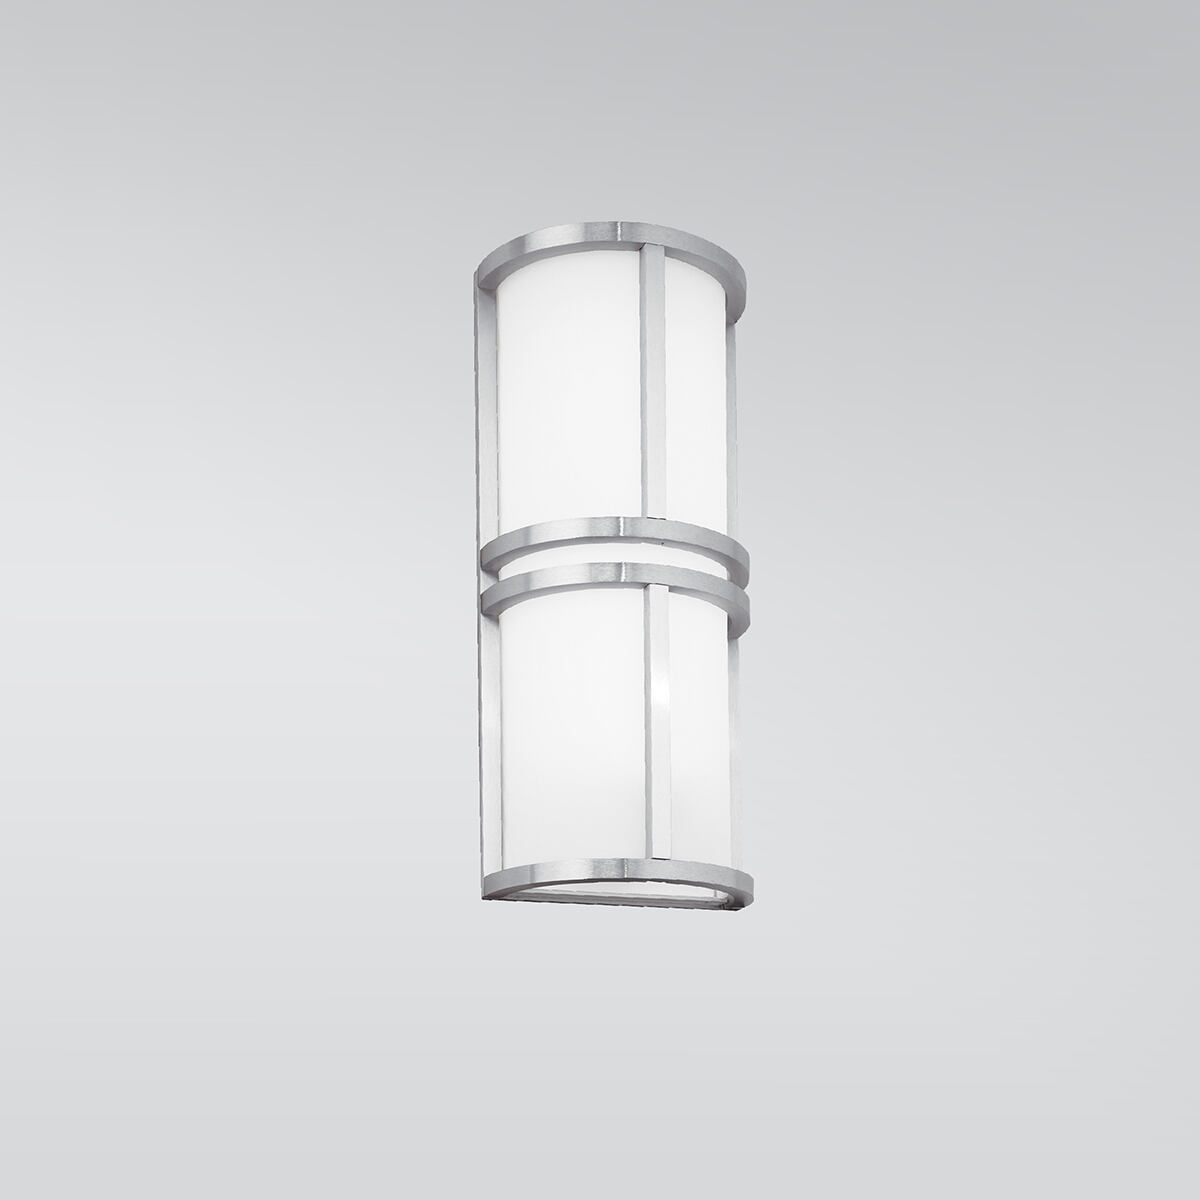 A rectangular indoor wall sconce with center bar accents